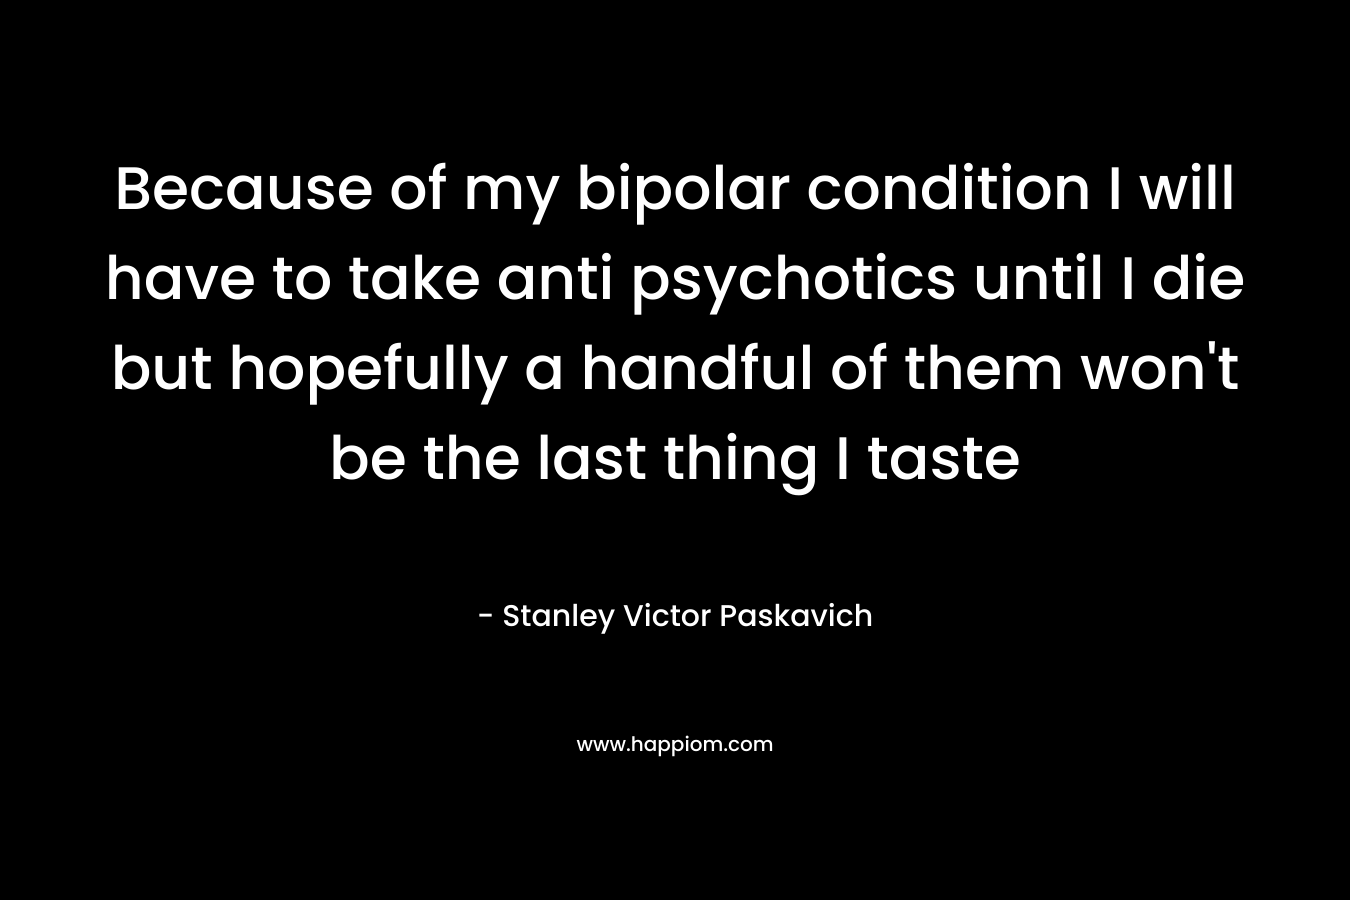 Because of my bipolar condition I will have to take anti psychotics until I die but hopefully a handful of them won’t be the last thing I taste – Stanley Victor Paskavich